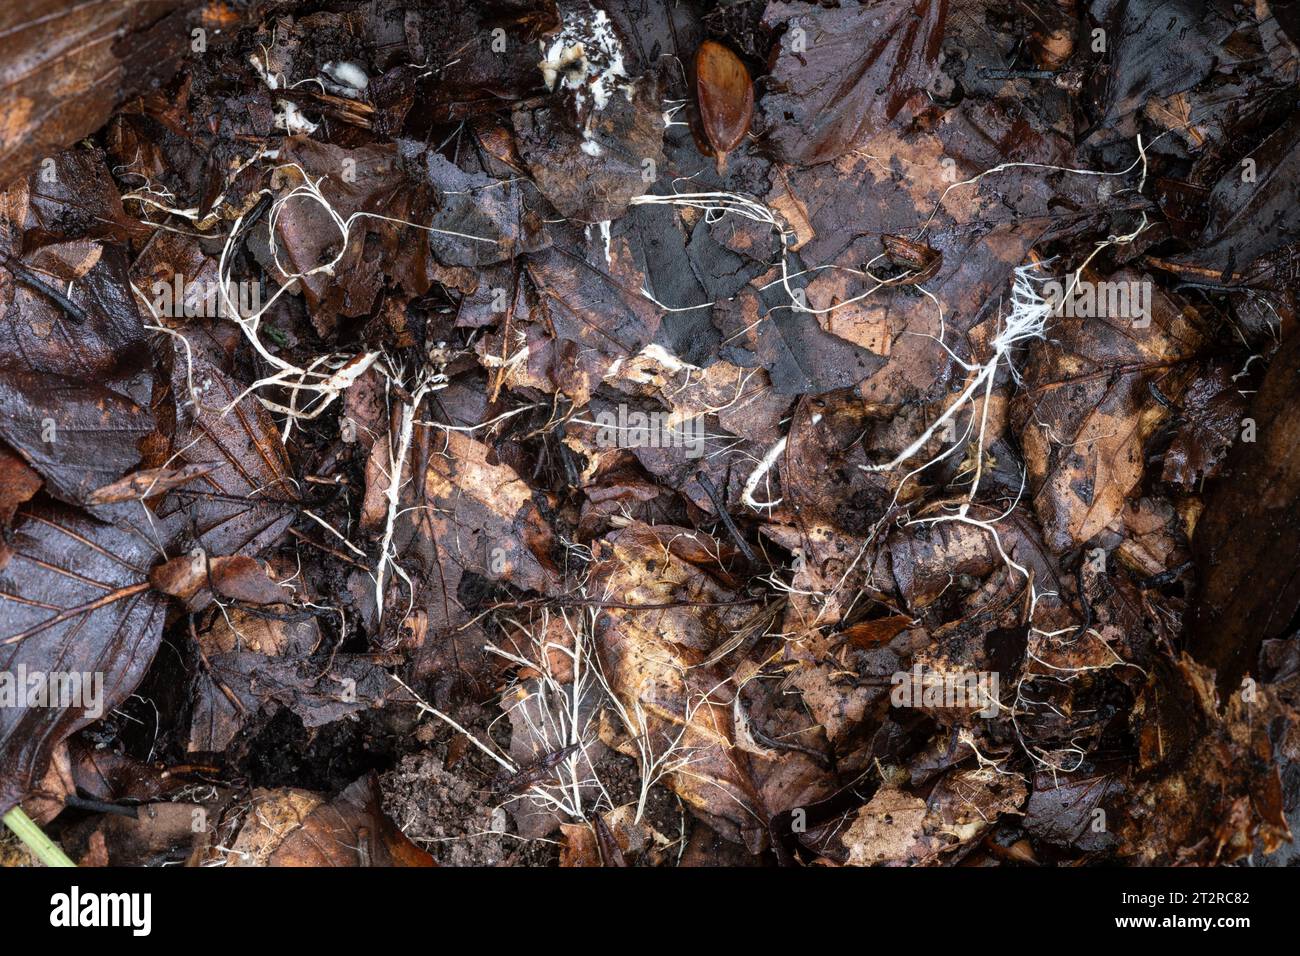 Fungal mycelium, white threads of a fungus in leaf litter in woodland, England, UK, autumn Stock Photo